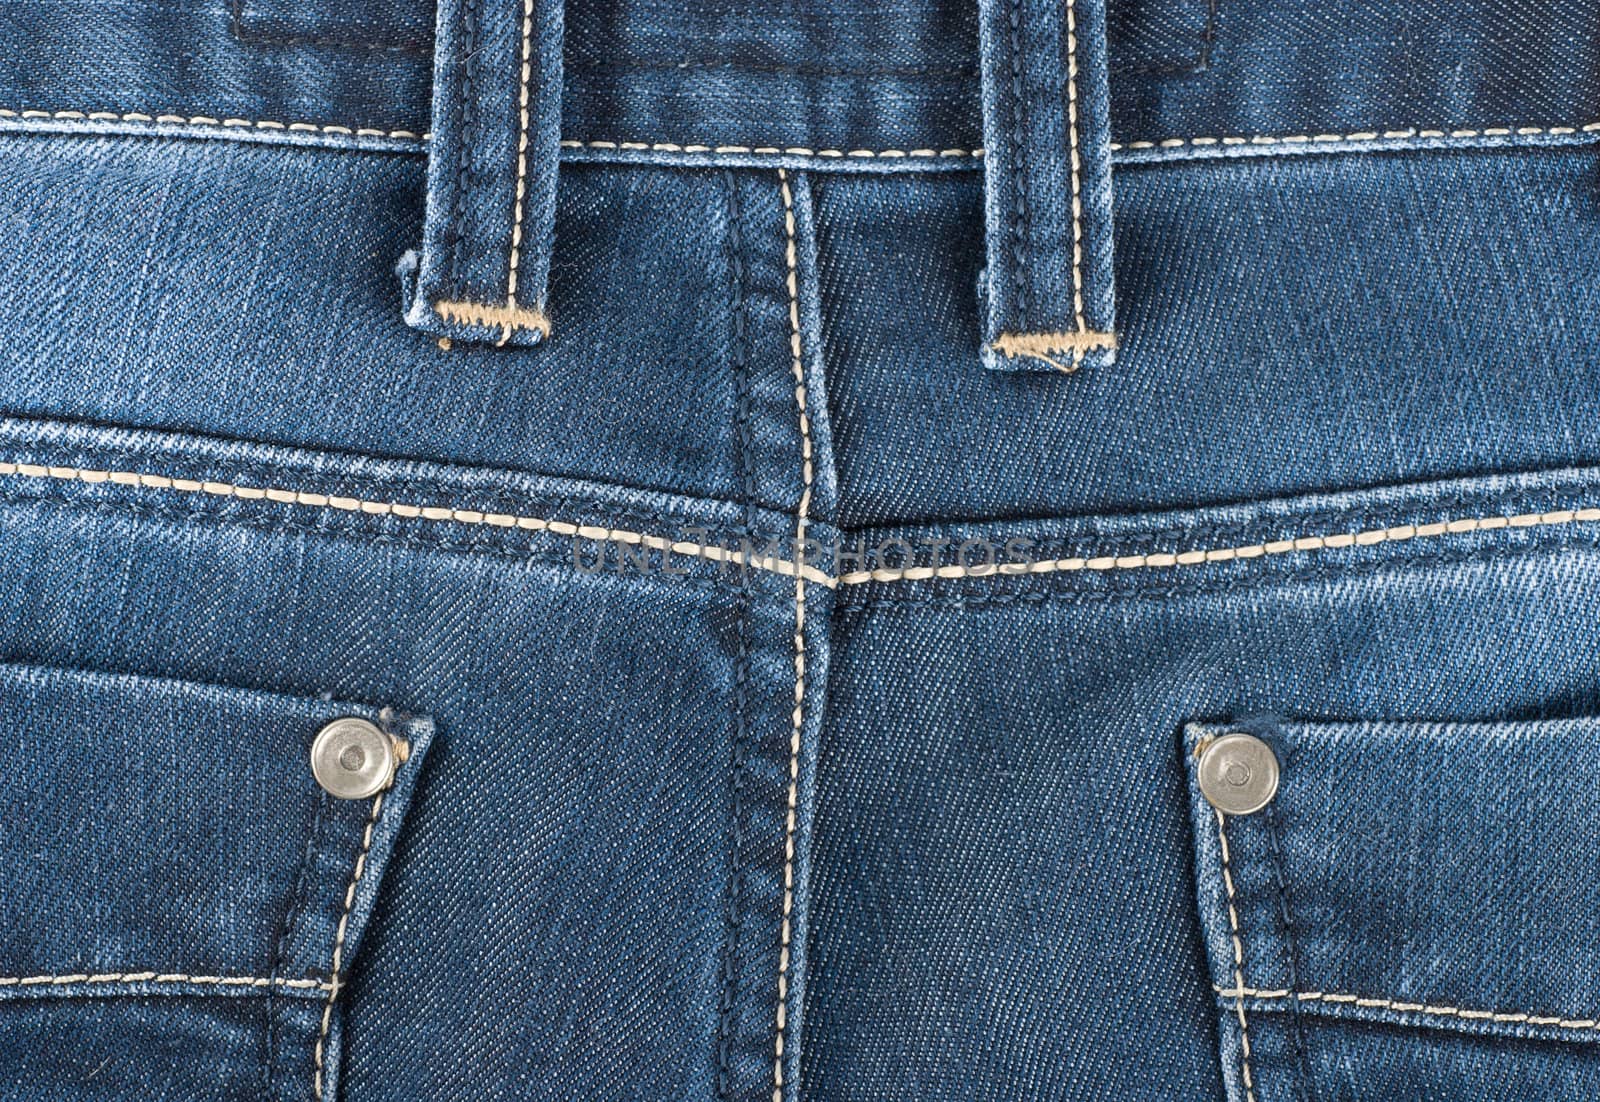 Pocket jeans background by Givaga